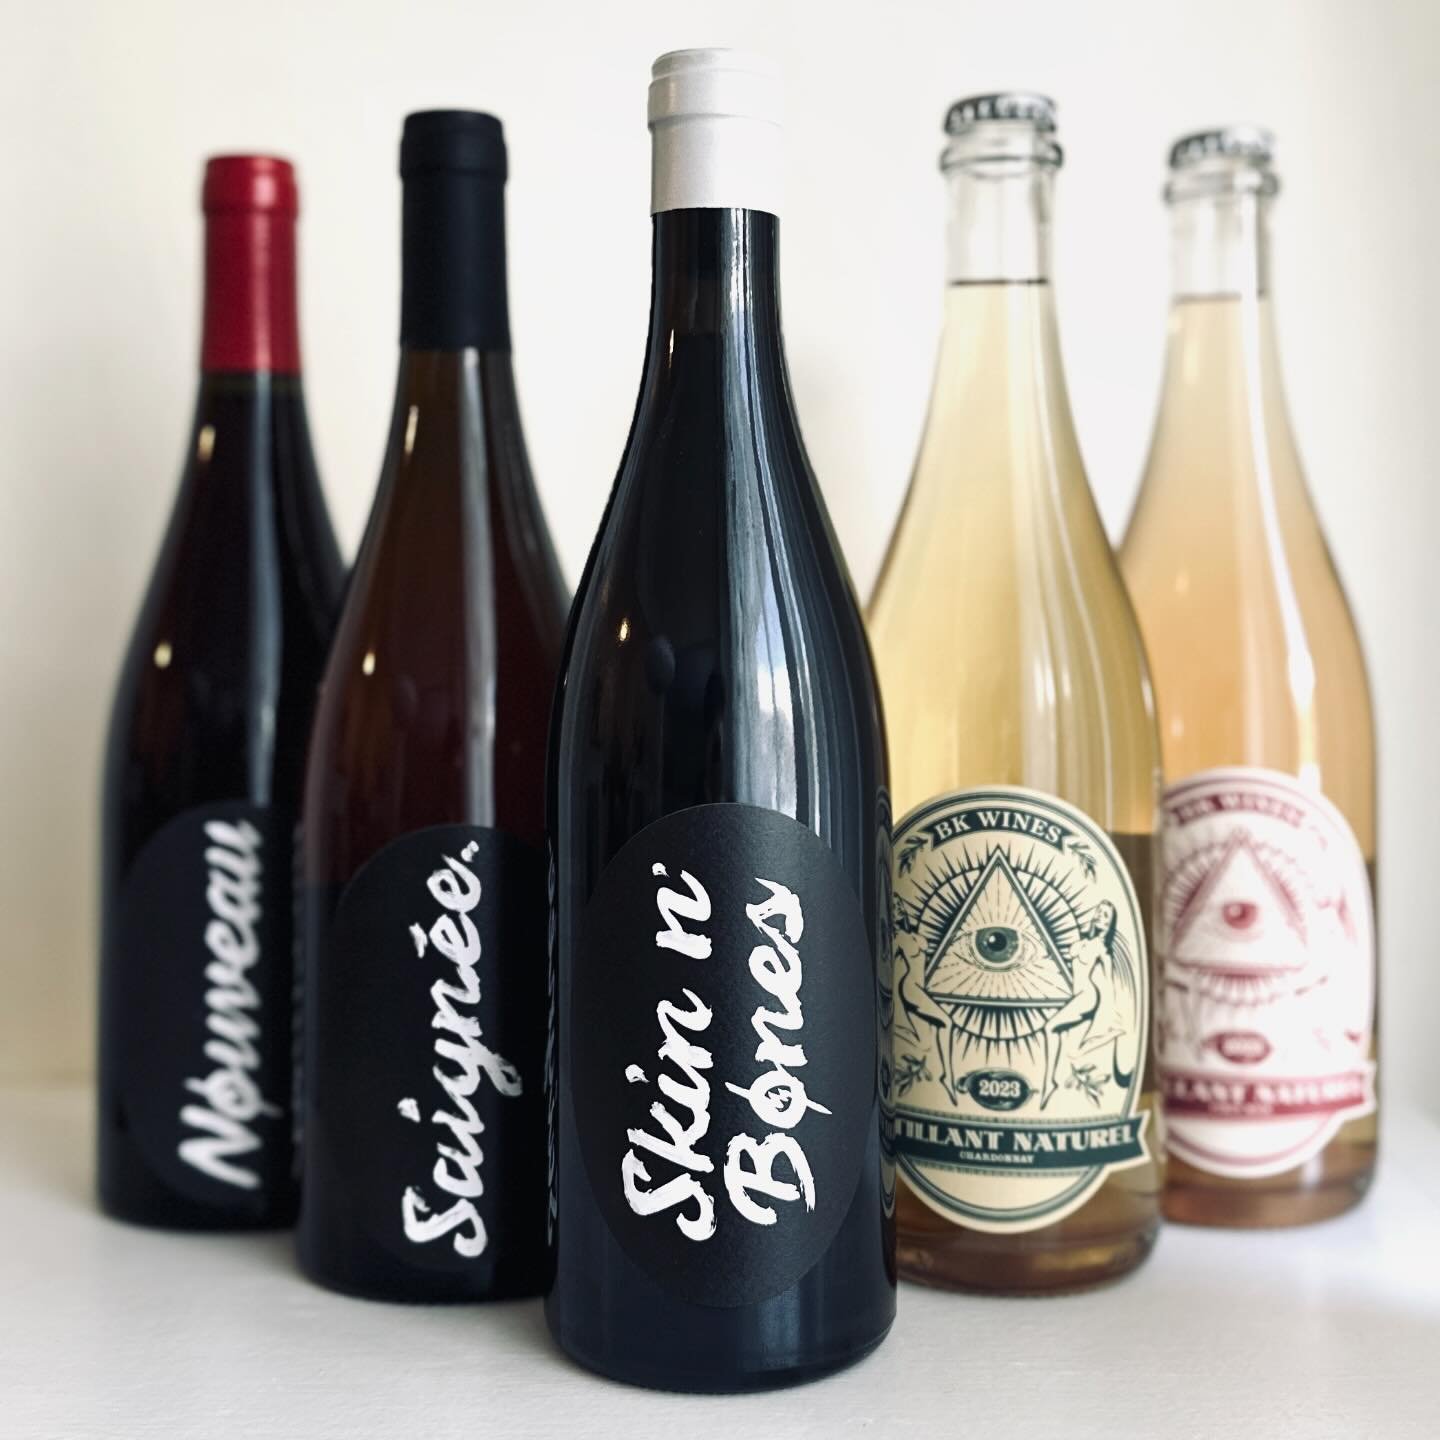 BK FOR SPRING!
- Pinot Noir Pet-Nat: white strawberry brioche in bed (302164)
- Grenache Nouveau: fluffy raspberry and blood orange pillows (307590)
- Pinot Noir Saign&eacute;e: br&ucirc;l&eacute;e grapefruit and expensive sandalwood (237865)
- Chard